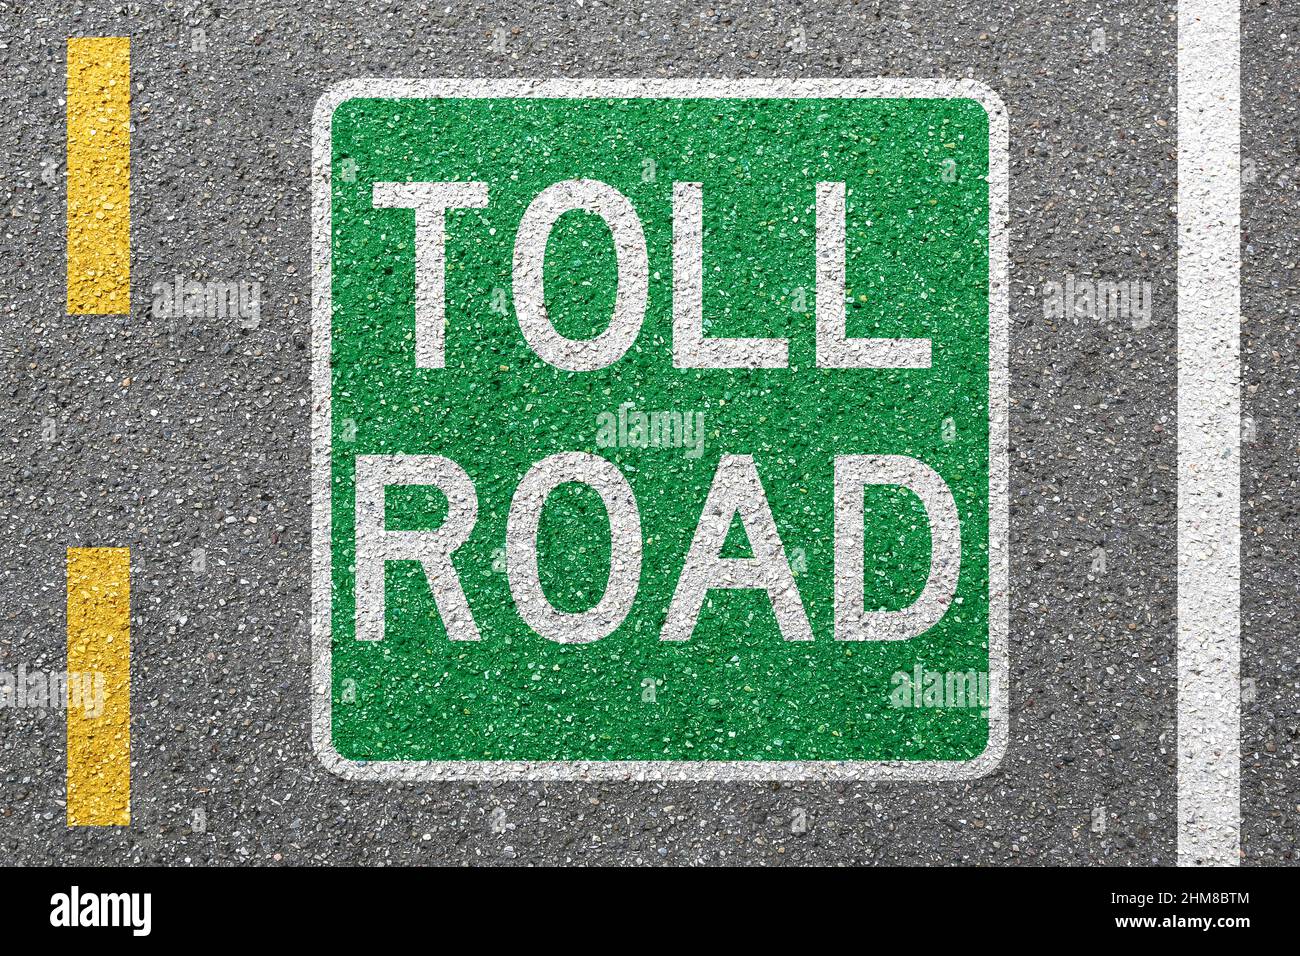 Toll road street city town pay paying highway sign zone concept Stock Photo